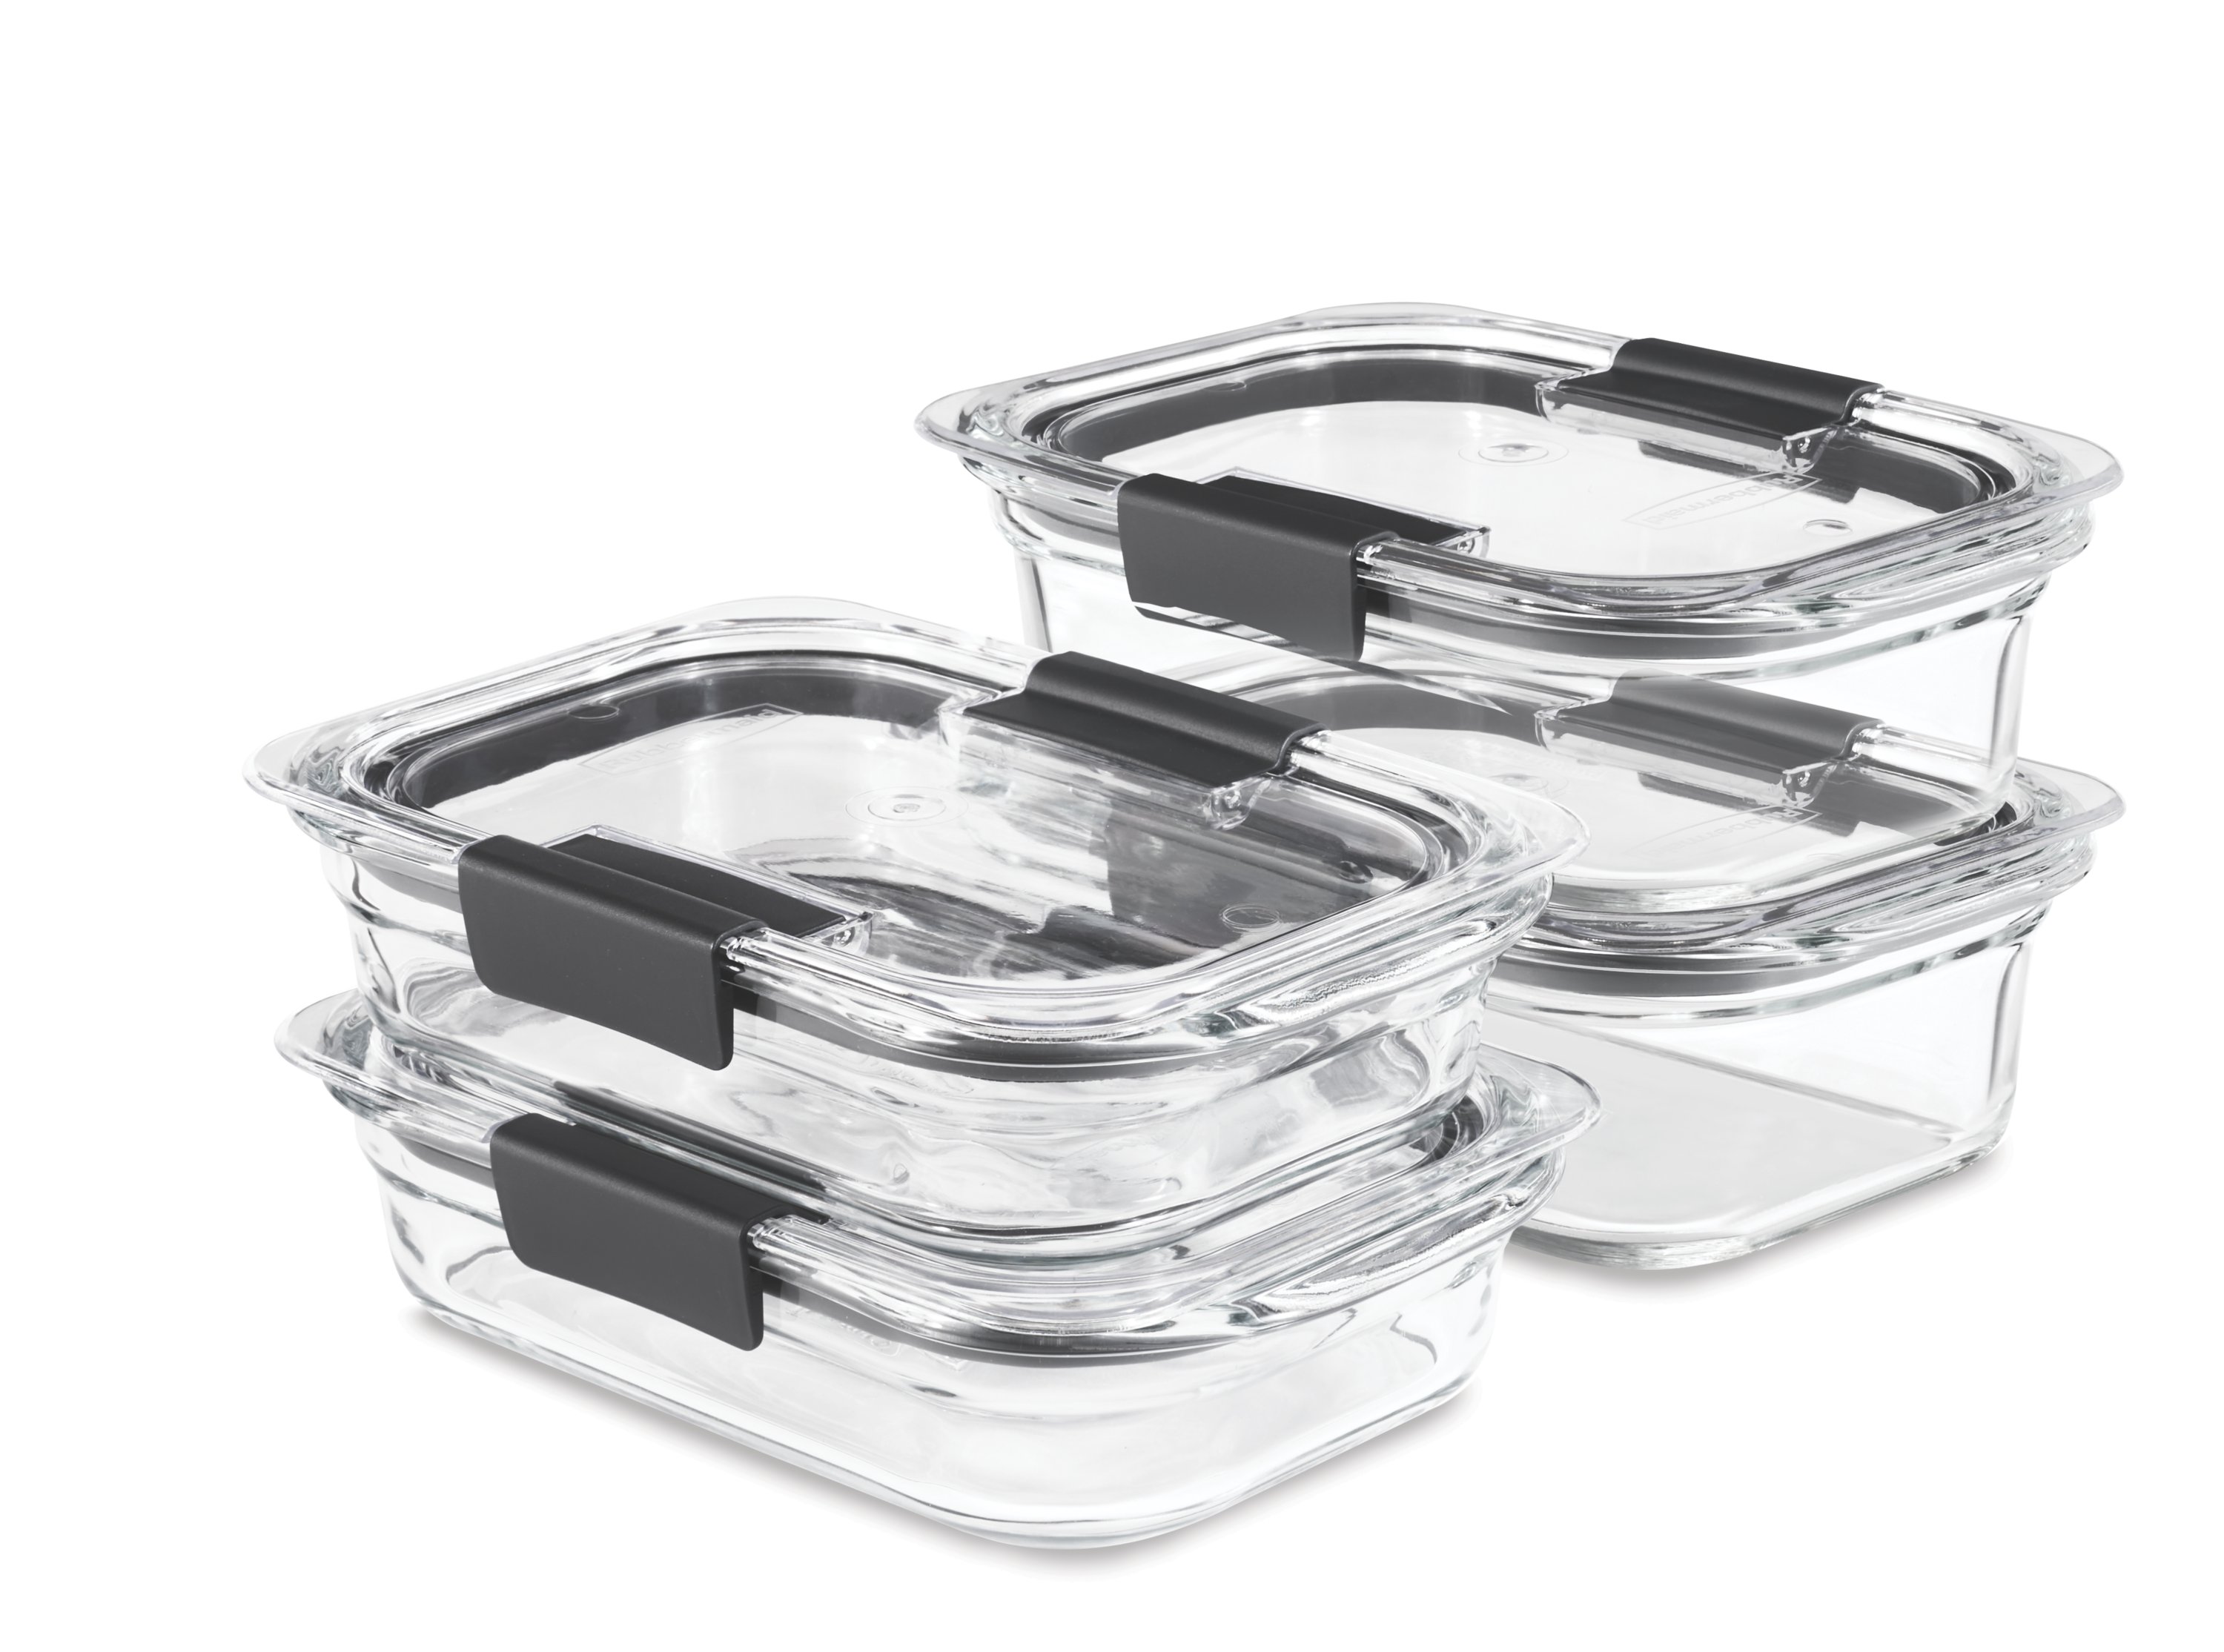 https://s7d9.scene7.com/is/image//NewellRubbermaid/2118313-rubbermaid-food-storage-brilliance-glass-clear-4pk-2c-3.2c-angle